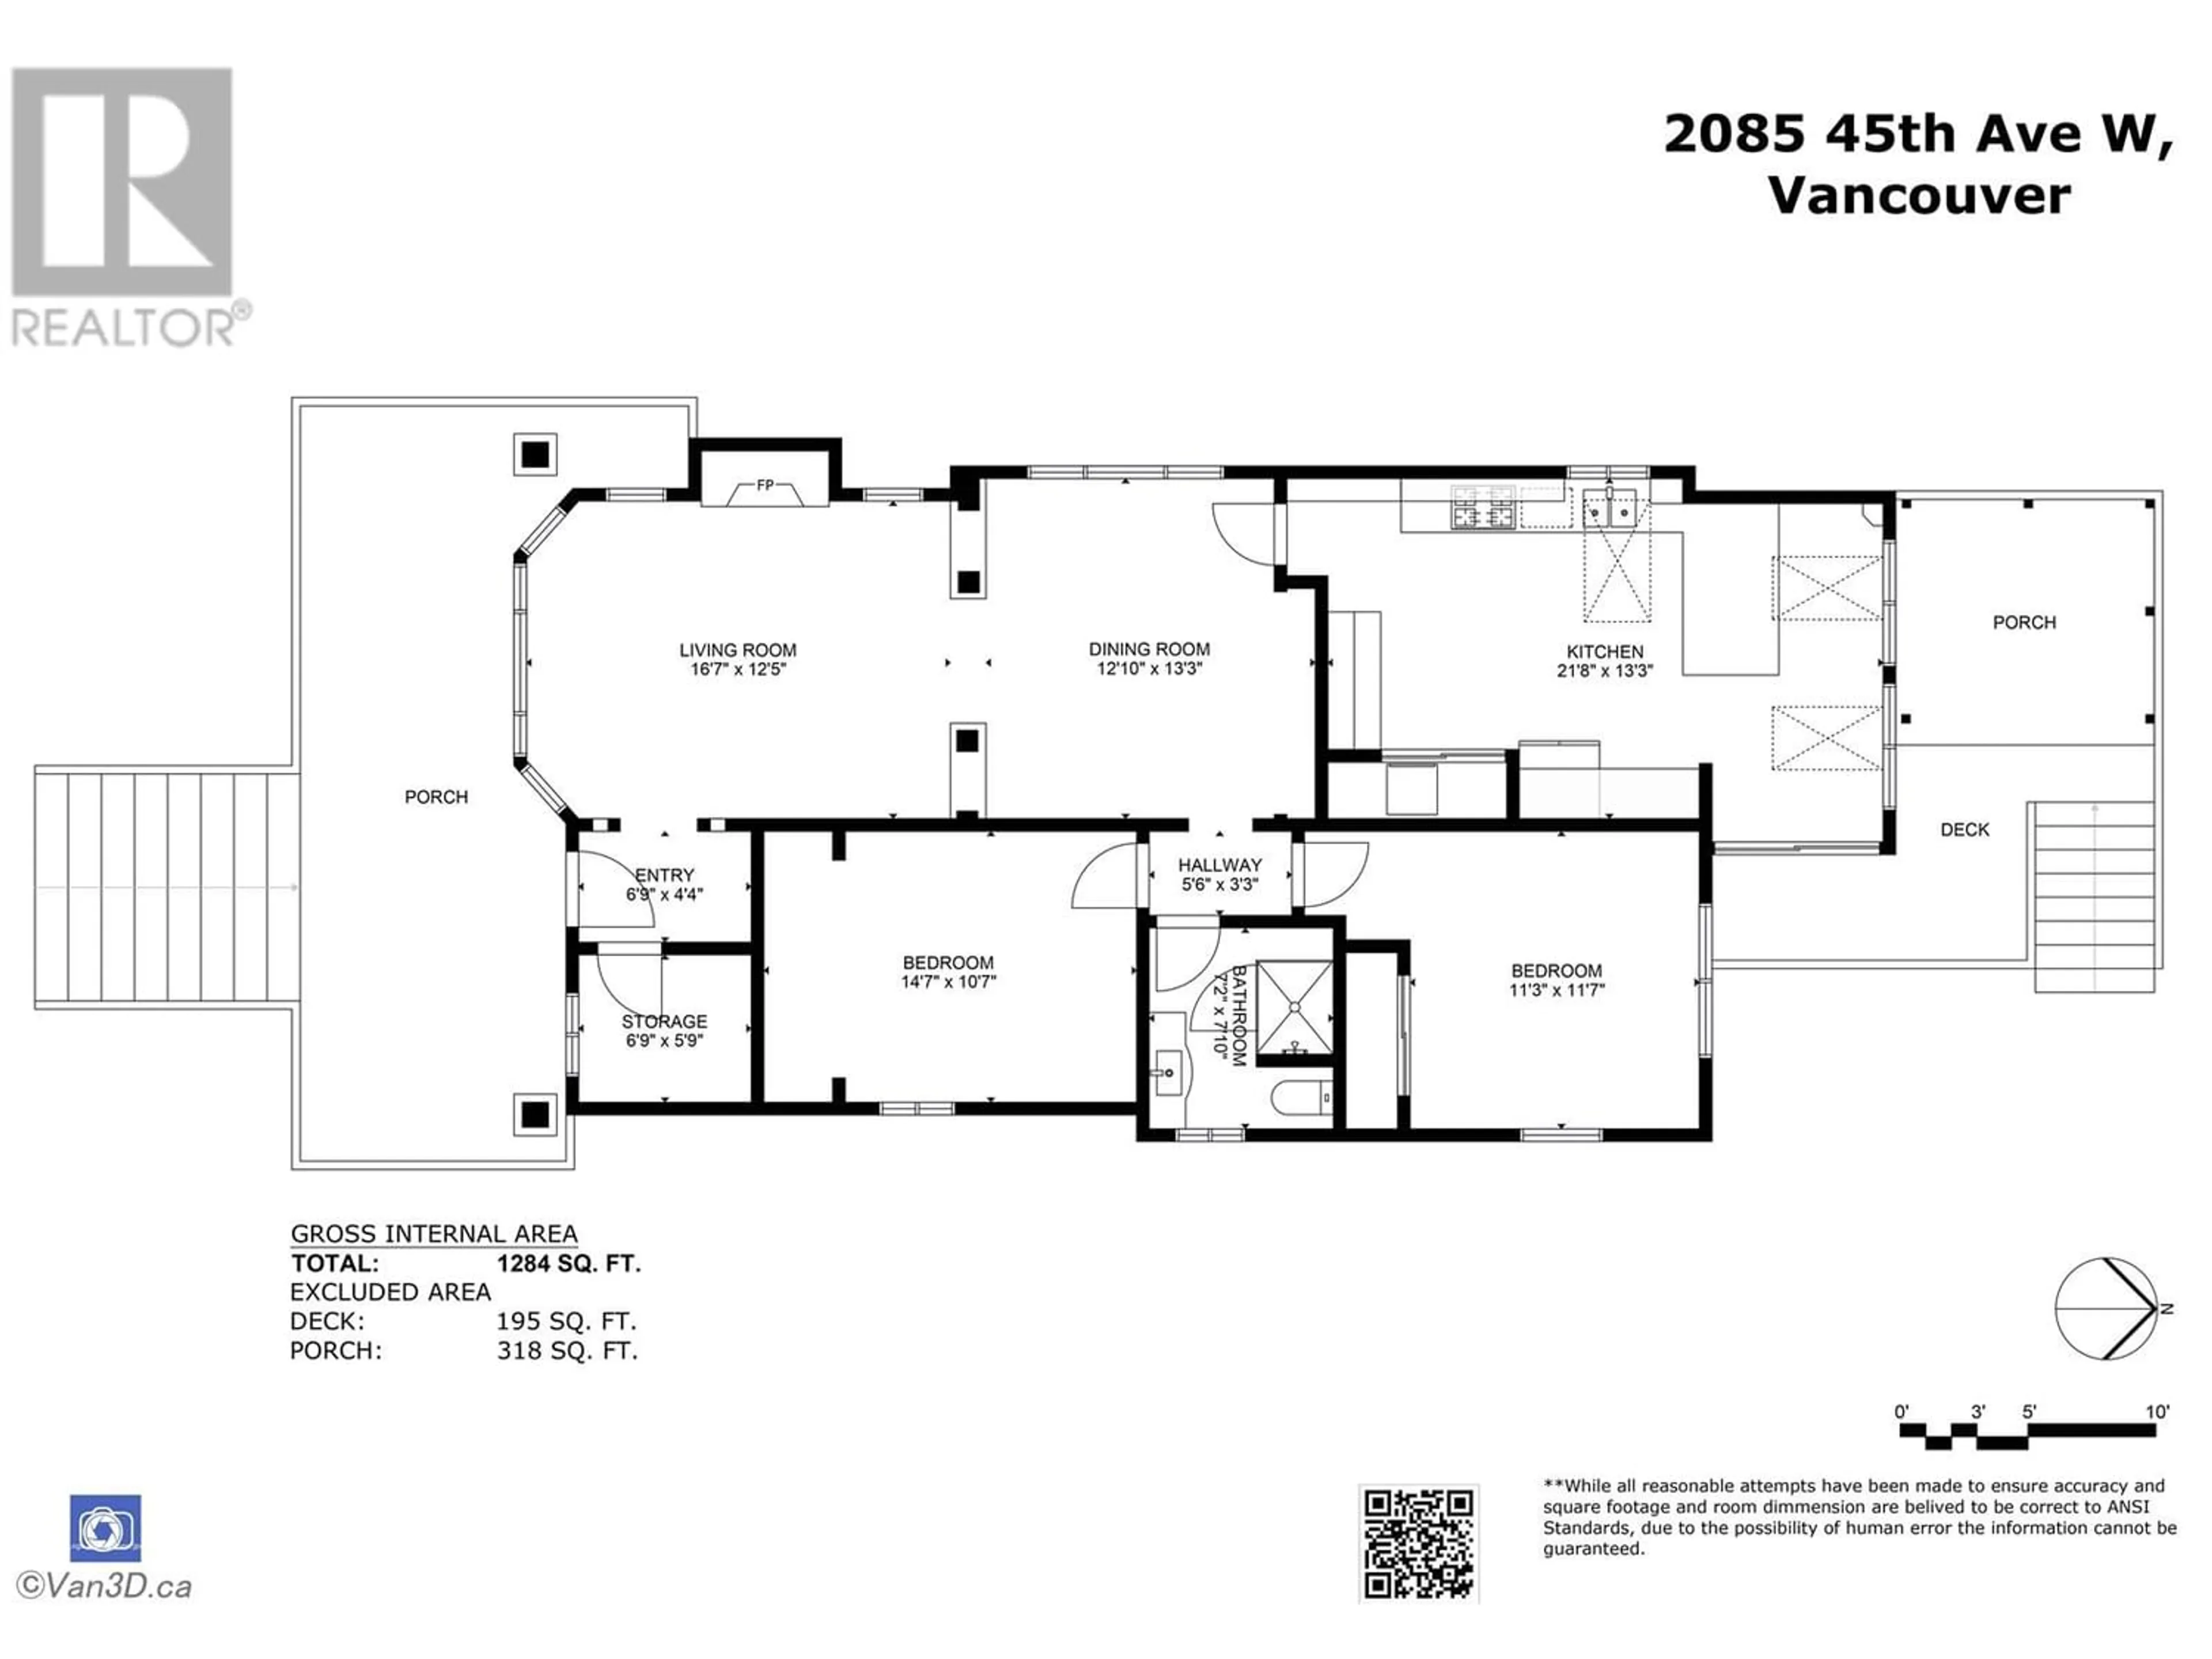 Floor plan for 2085 W 45TH AVENUE, Vancouver British Columbia V6M2H8